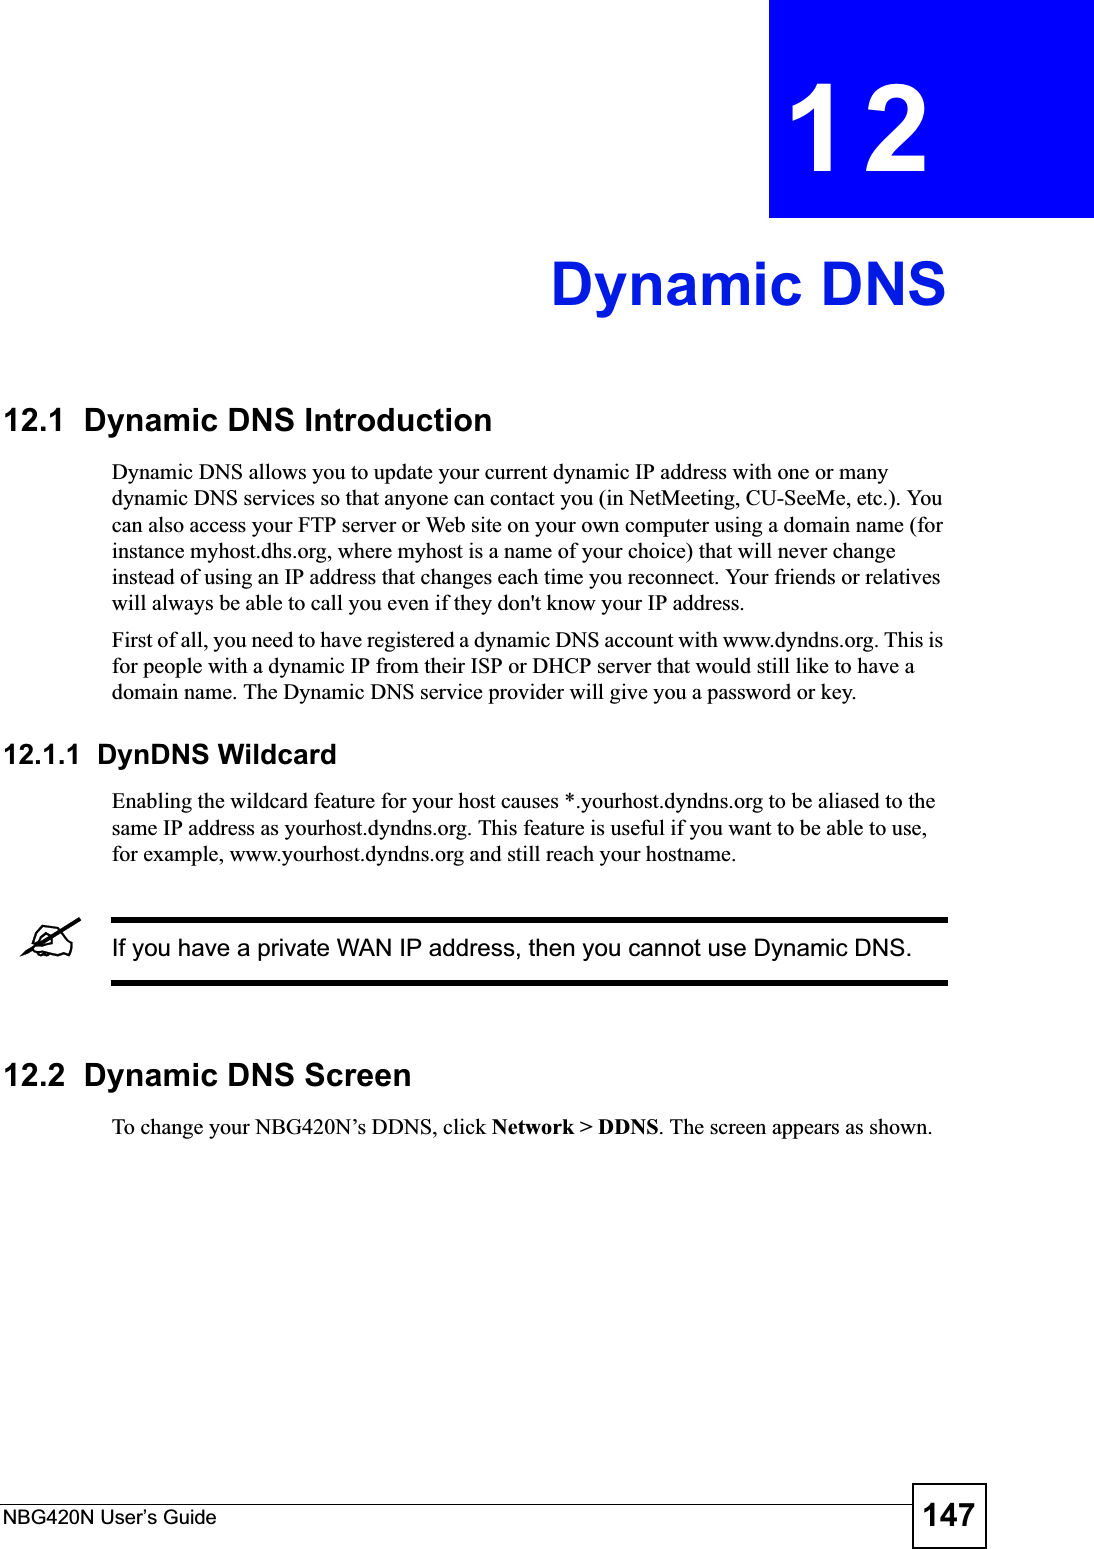 NBG420N User’s Guide 147CHAPTER 12Dynamic DNS12.1  Dynamic DNS Introduction Dynamic DNS allows you to update your current dynamic IP address with one or many dynamic DNS services so that anyone can contact you (in NetMeeting, CU-SeeMe, etc.). You can also access your FTP server or Web site on your own computer using a domain name (for instance myhost.dhs.org, where myhost is a name of your choice) that will never change instead of using an IP address that changes each time you reconnect. Your friends or relatives will always be able to call you even if they don&apos;t know your IP address.First of all, you need to have registered a dynamic DNS account with www.dyndns.org. This is for people with a dynamic IP from their ISP or DHCP server that would still like to have a domain name. The Dynamic DNS service provider will give you a password or key.12.1.1  DynDNS Wildcard Enabling the wildcard feature for your host causes *.yourhost.dyndns.org to be aliased to the same IP address as yourhost.dyndns.org. This feature is useful if you want to be able to use, for example, www.yourhost.dyndns.org and still reach your hostname.&quot;If you have a private WAN IP address, then you cannot use Dynamic DNS.12.2  Dynamic DNS ScreenTo change your NBG420N’s DDNS, click Network &gt; DDNS. The screen appears as shown.